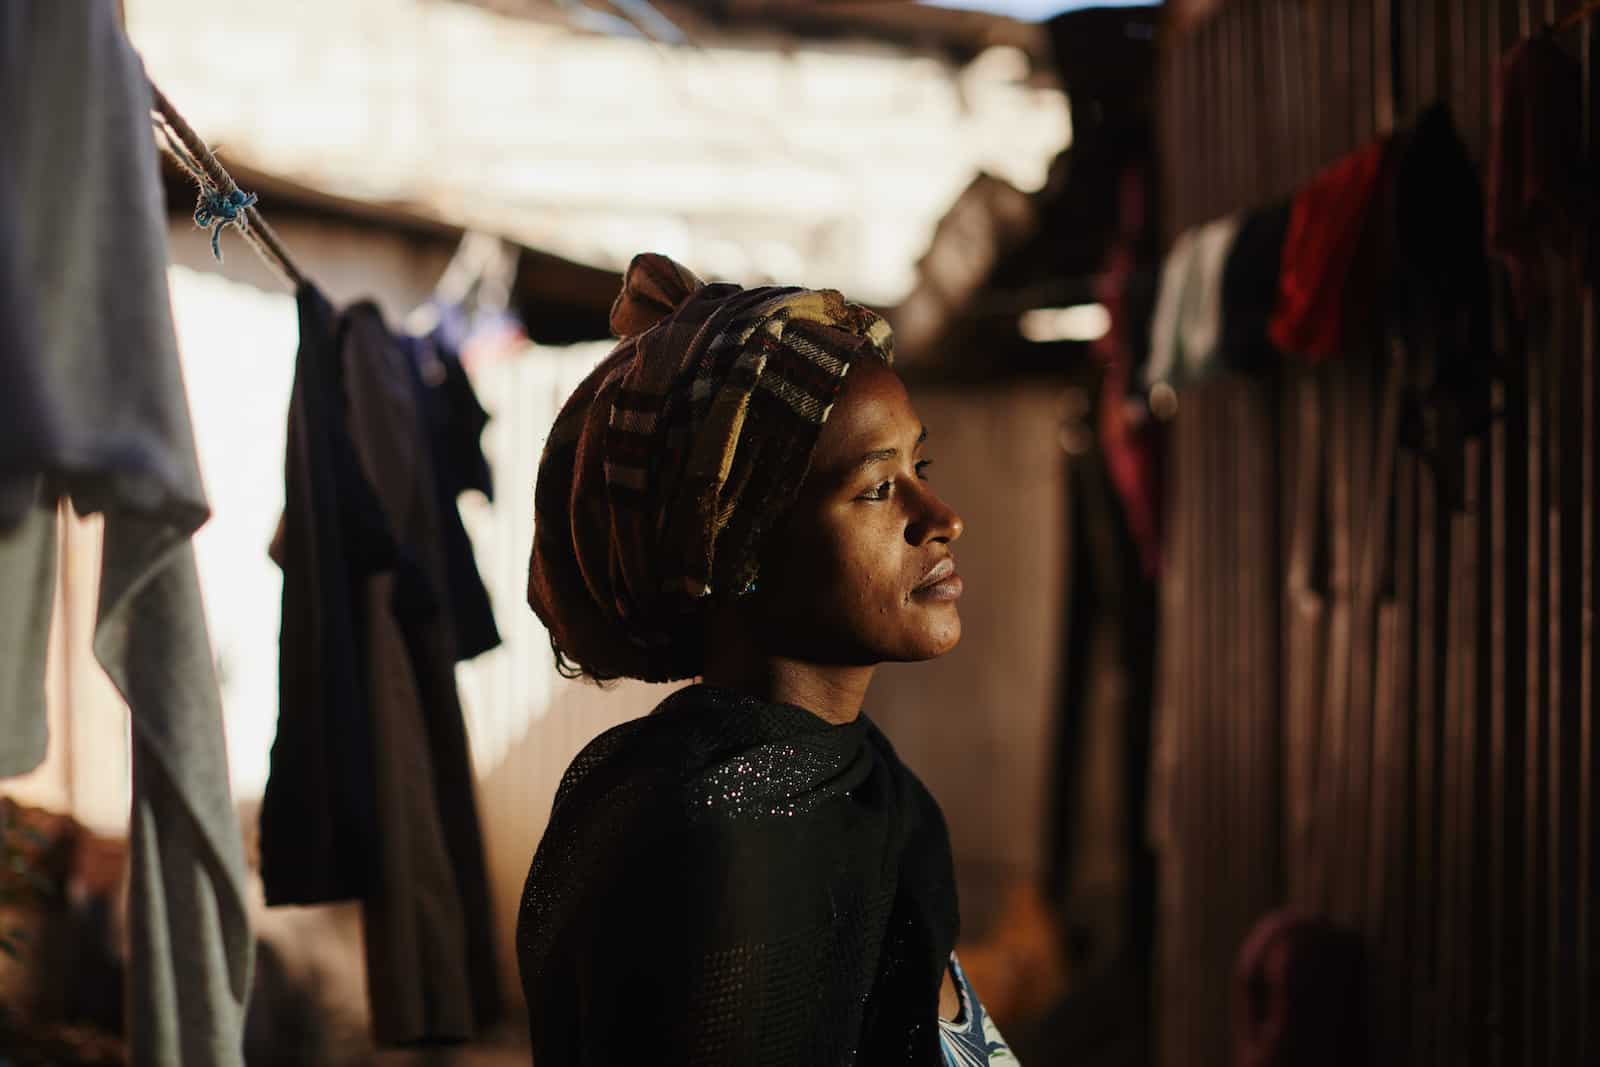 A woman wearing a plaid headscarf and black shawl looks to the side. She stands in a dark alley with laundry hanging on the line.